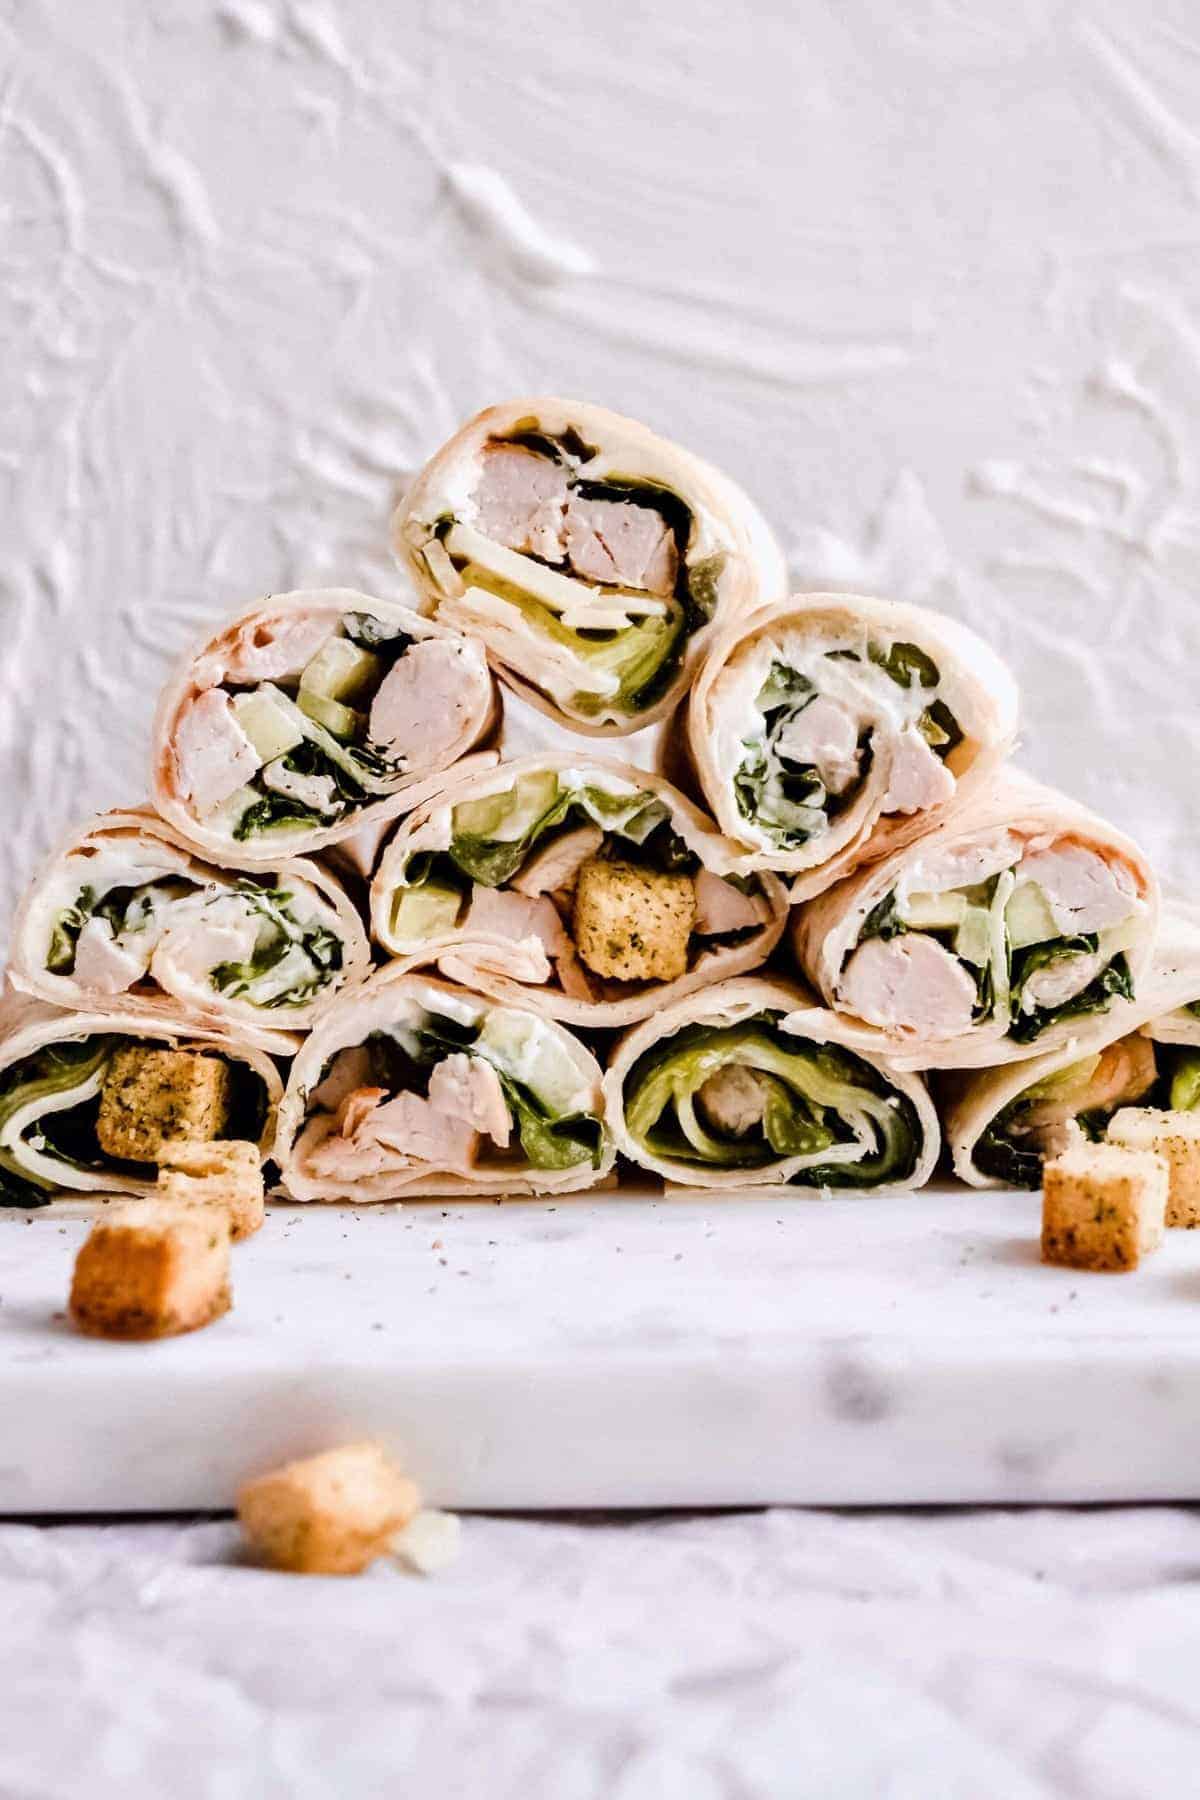 Filled wraps stacked in a pyramid